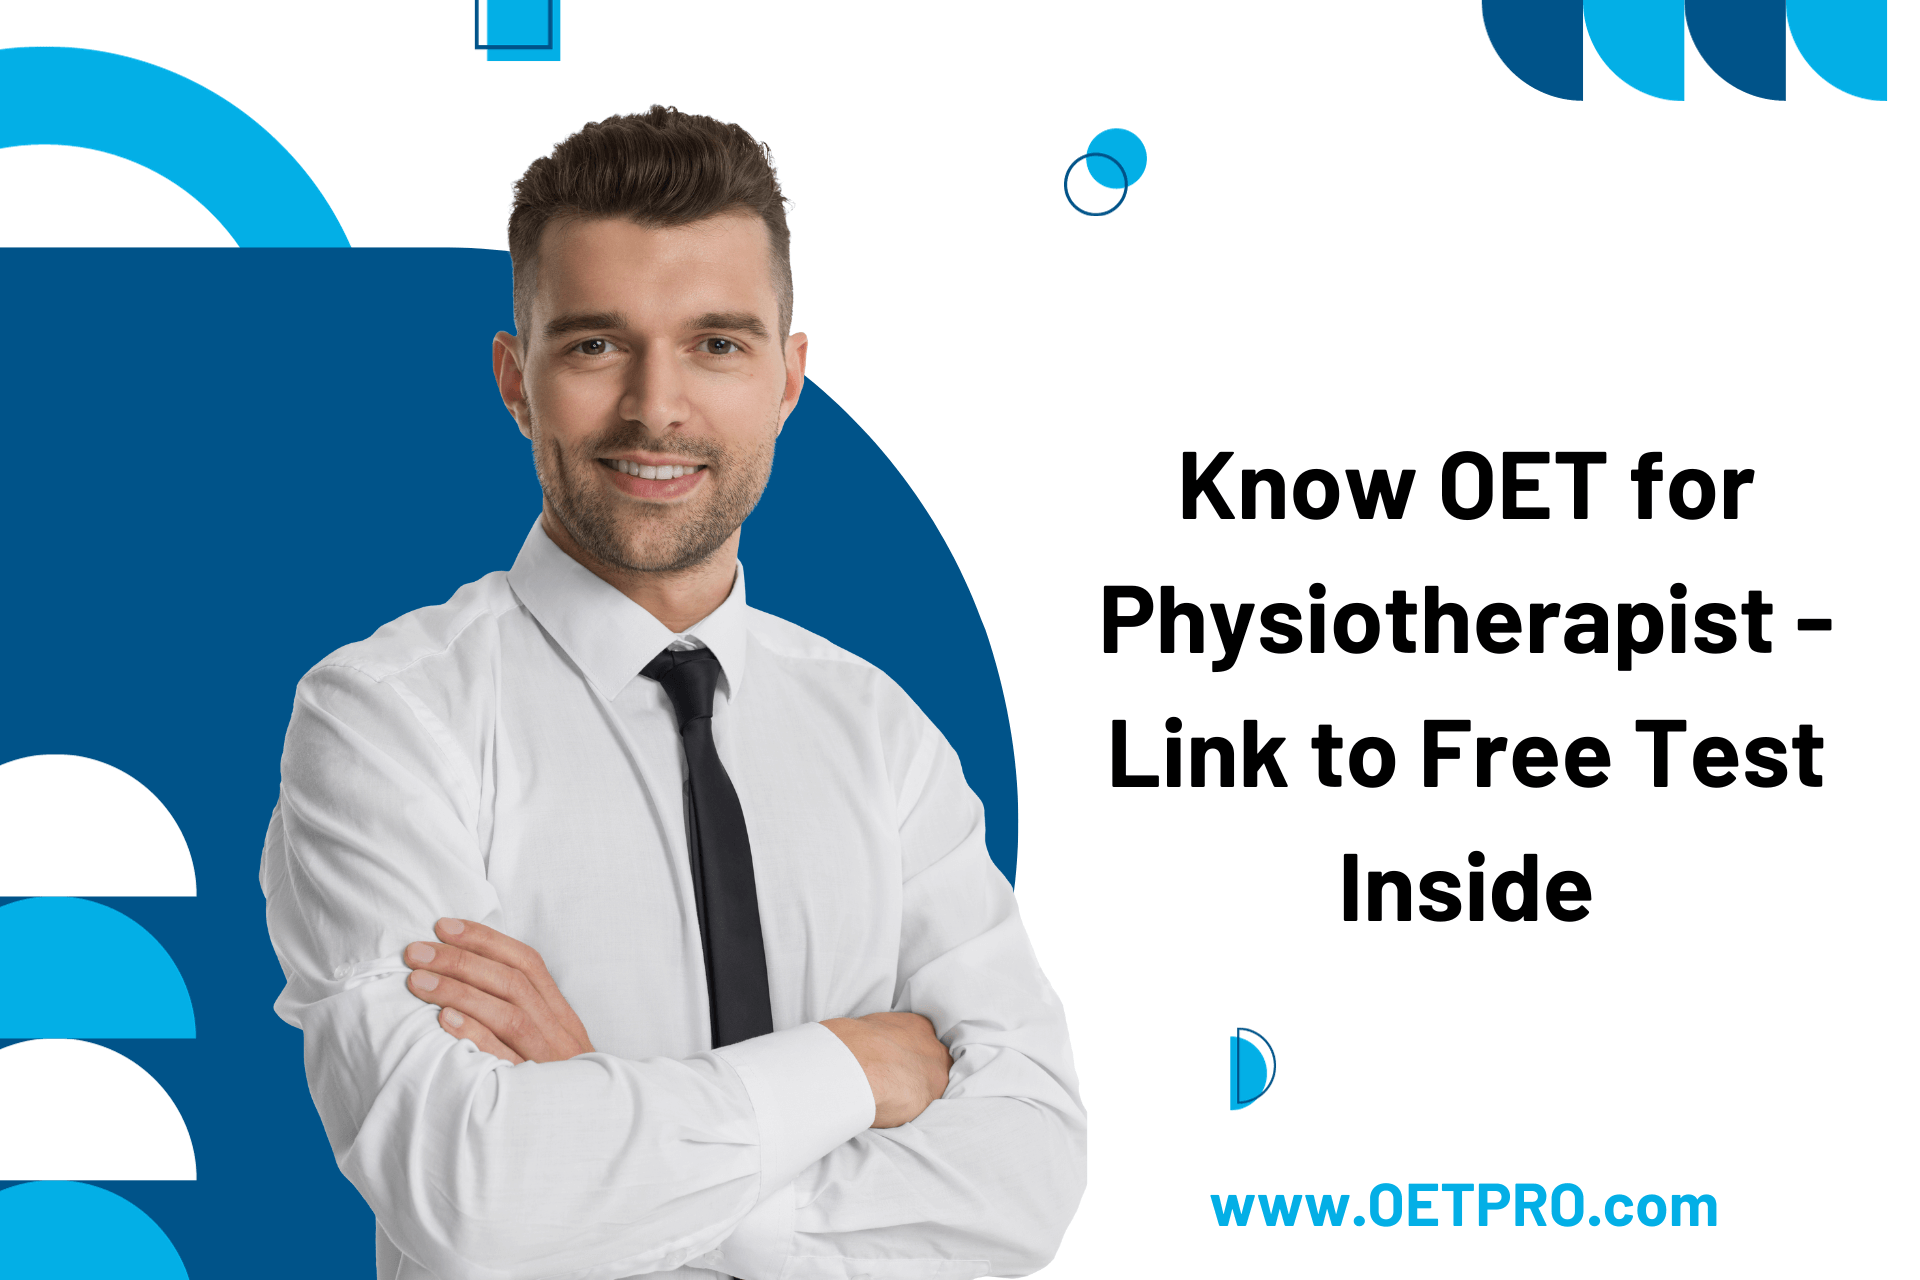 Know OET for Physiotherapist – Link to Free Test Inside